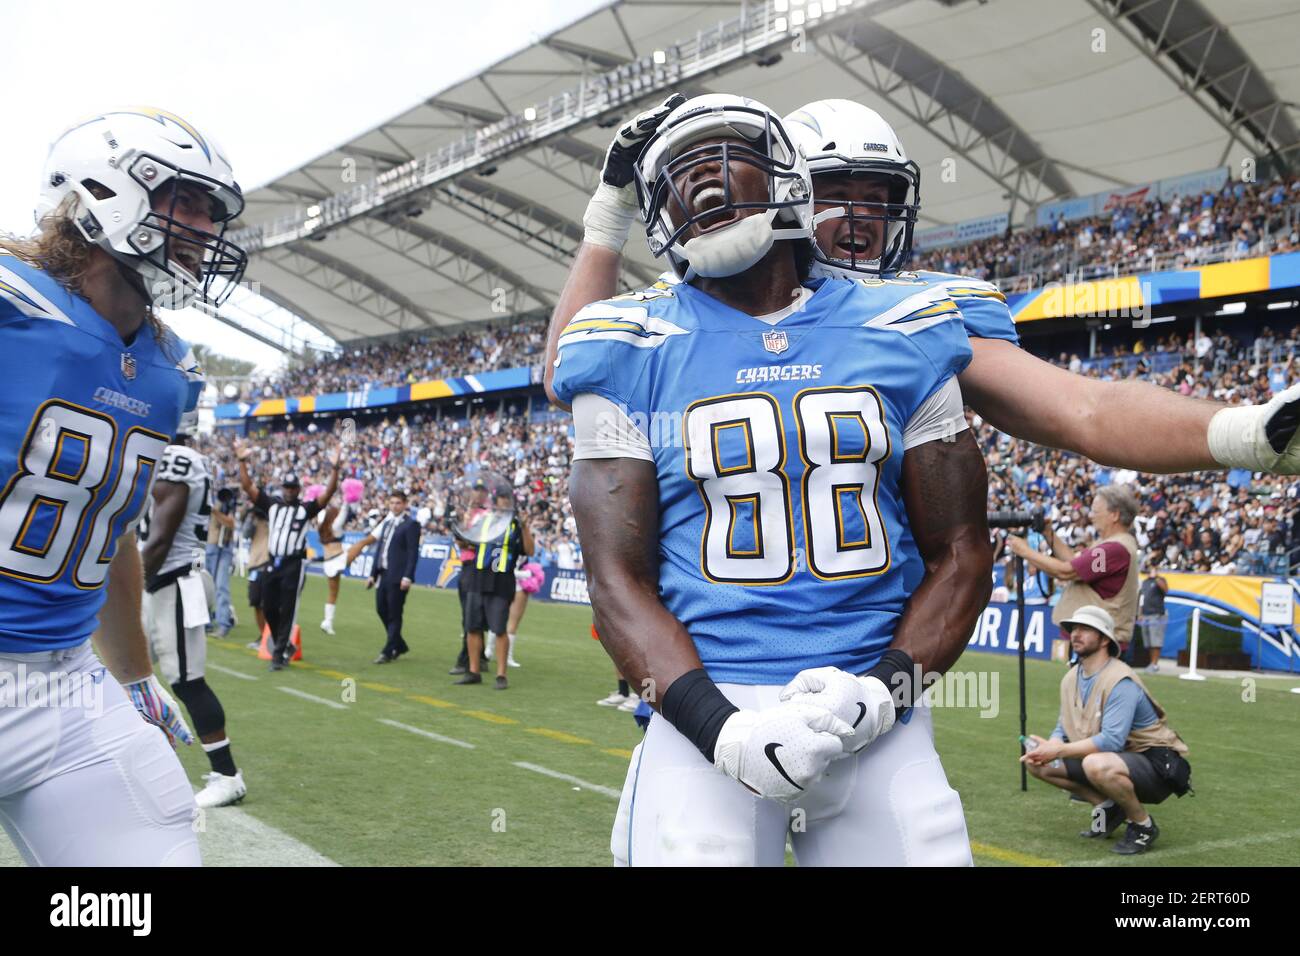 October 07, 2018 Los Angeles Chargers tight end Virgil Green (88)  celebrates after scoring a touchdown during the football game between the  Oakland Raiders and the Los Angeles Chargers at the StubHub